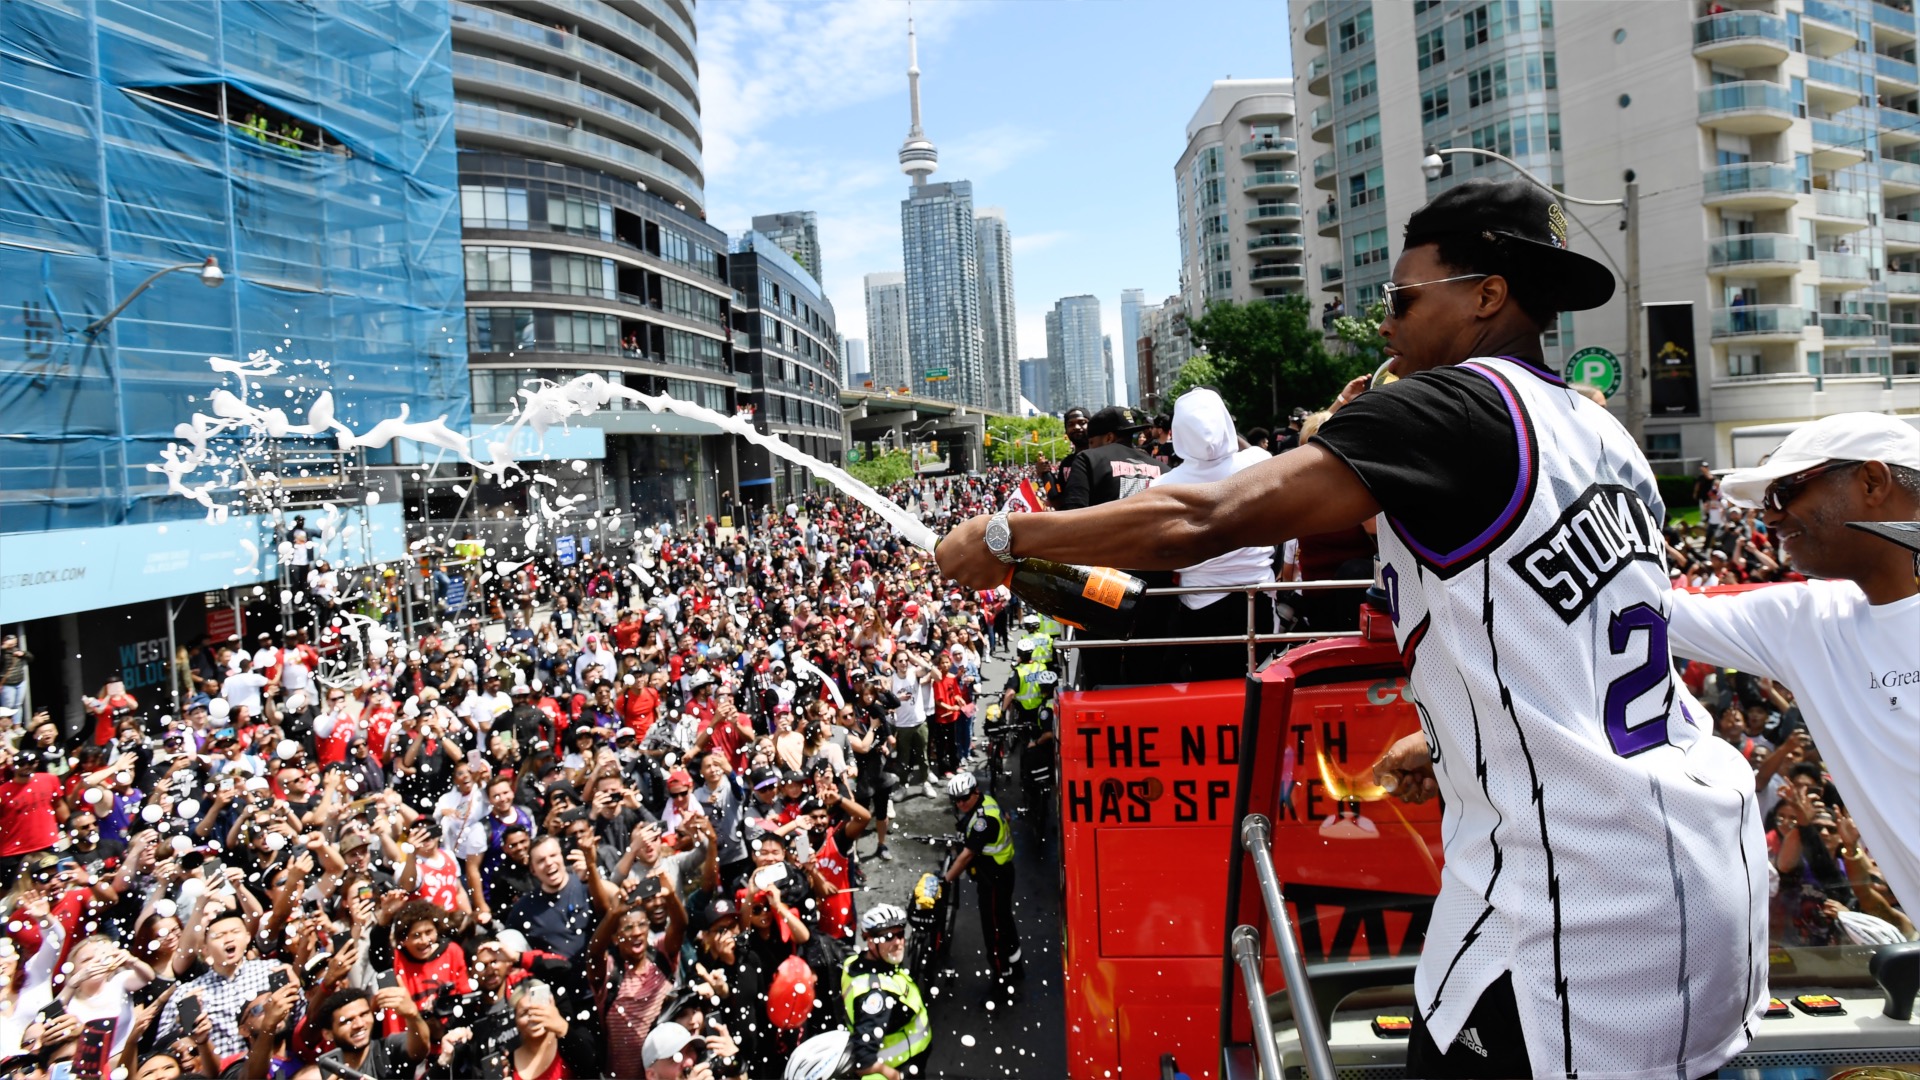 Geared up: Raptors' historic NBA Finals win boosts demand for merchandise -  The Globe and Mail